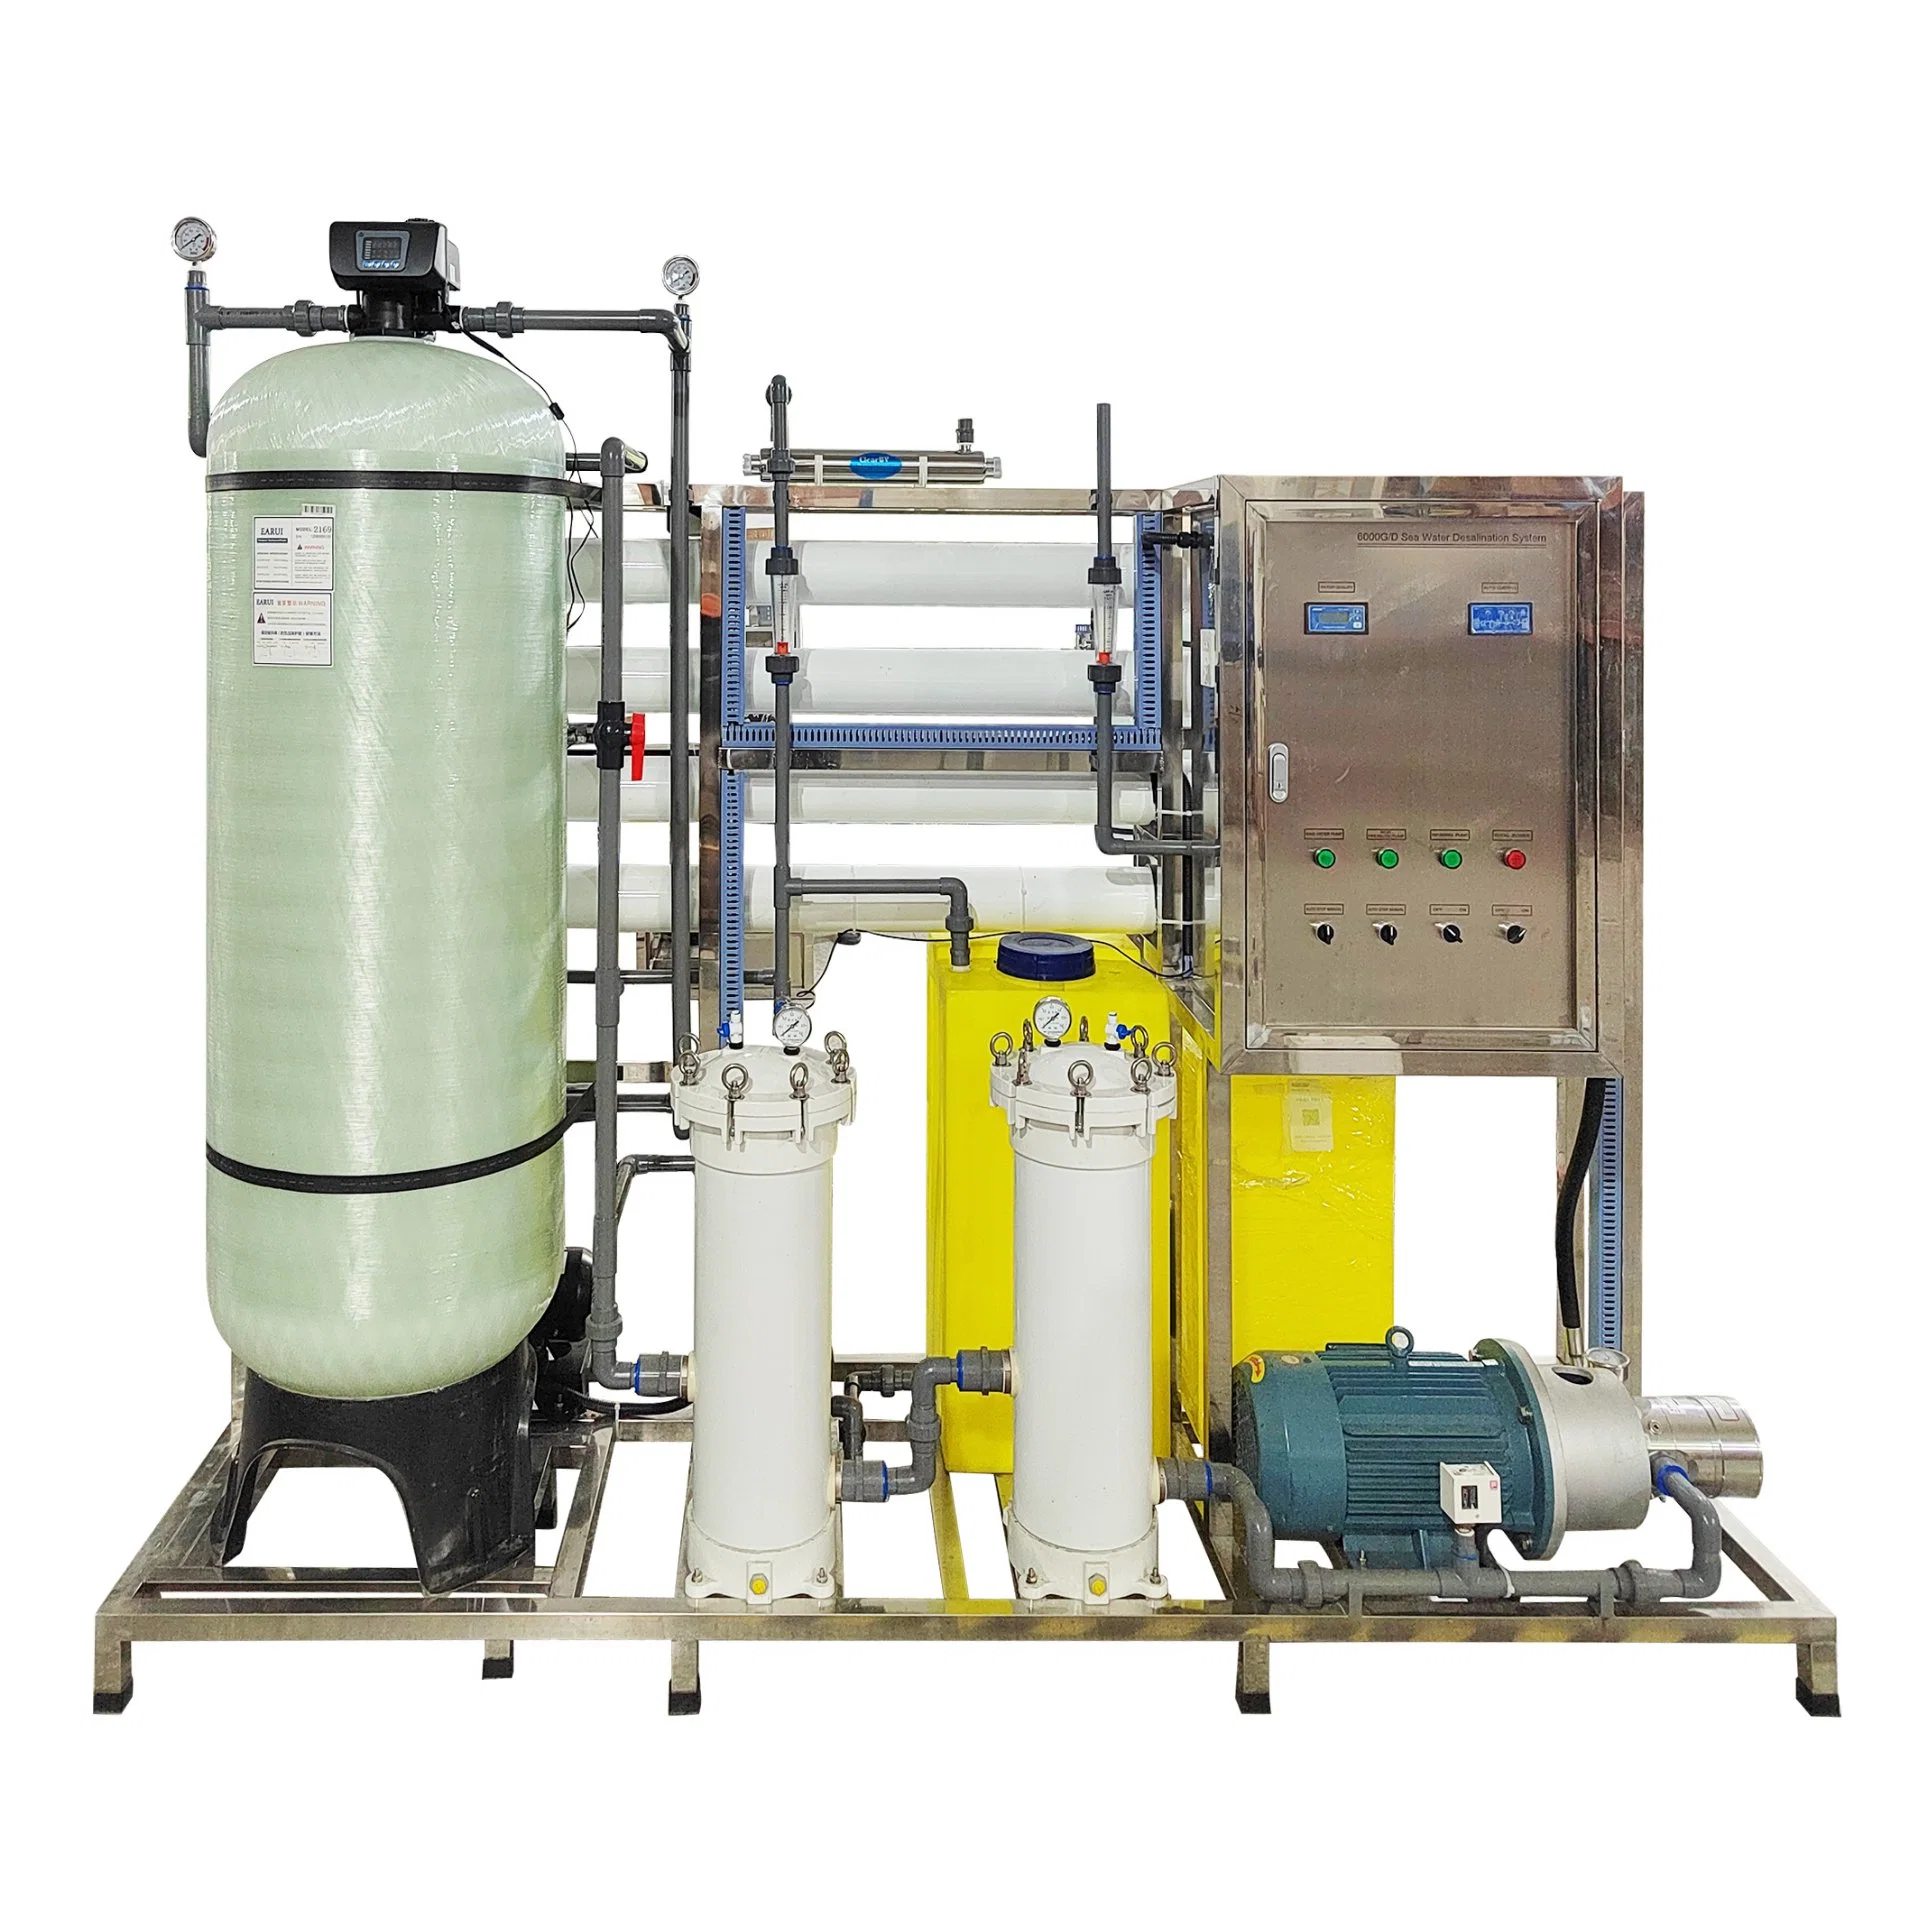 High Salinity Desalination Sea Water Desalination Plant, Seawater Treatment Equipment for Steam Boiler on Boat Ship Yatch 1000lph